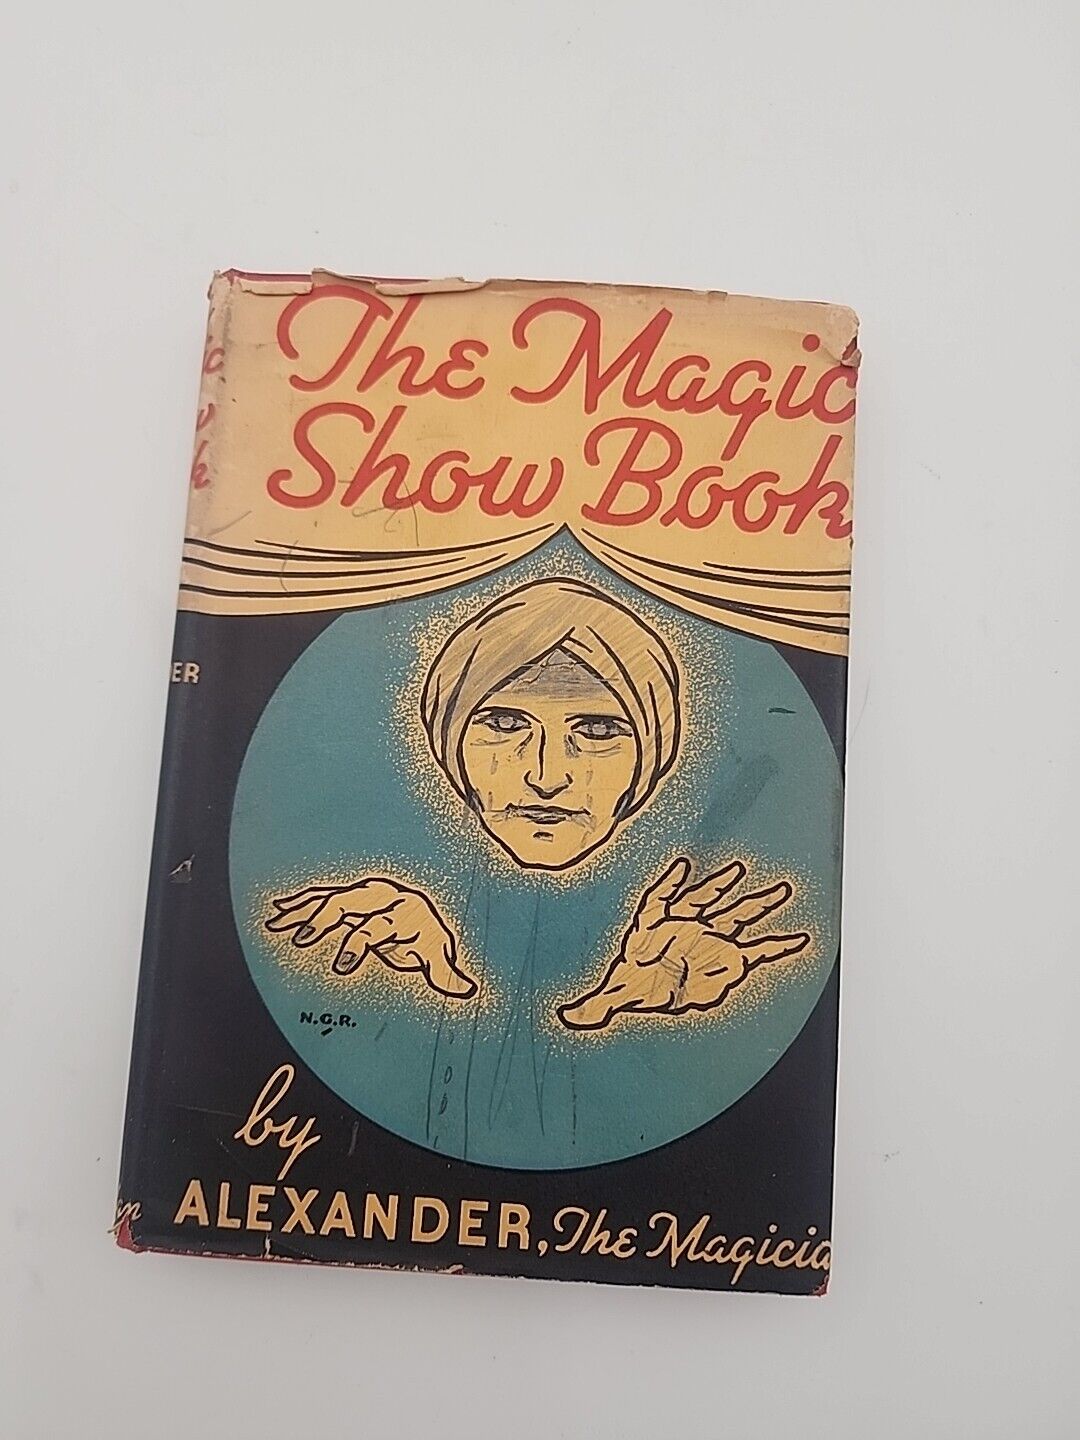 Vintage 1937 The Magic Show Book by Alexander, The Magician w/ DJ